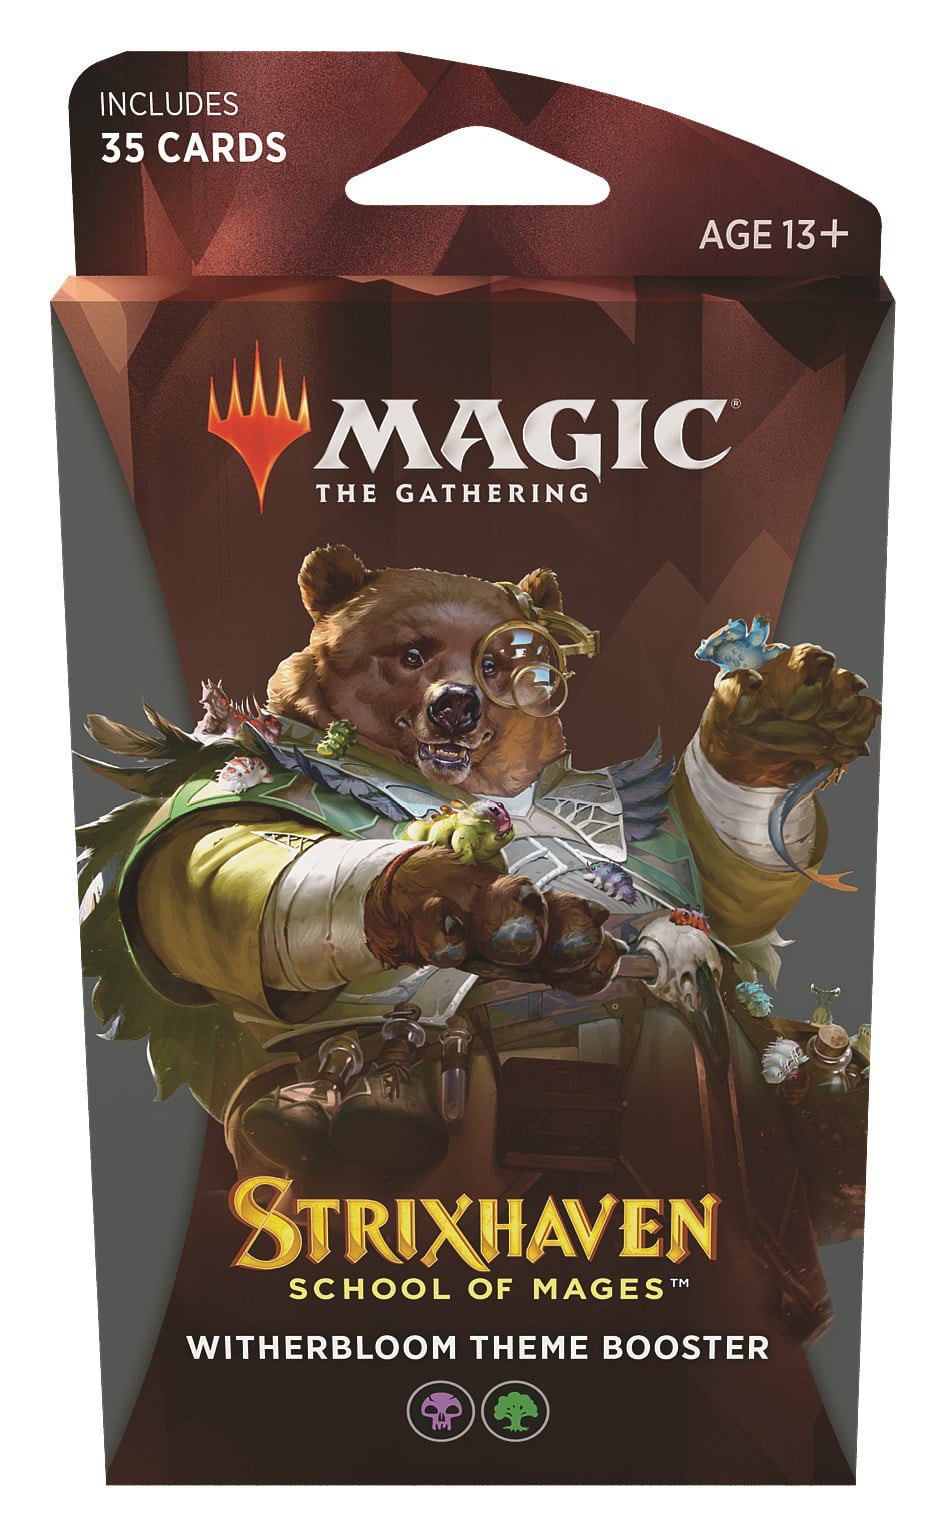 Magic the Gathering Strixhaven School of Mages Theme Booster Set of 5 